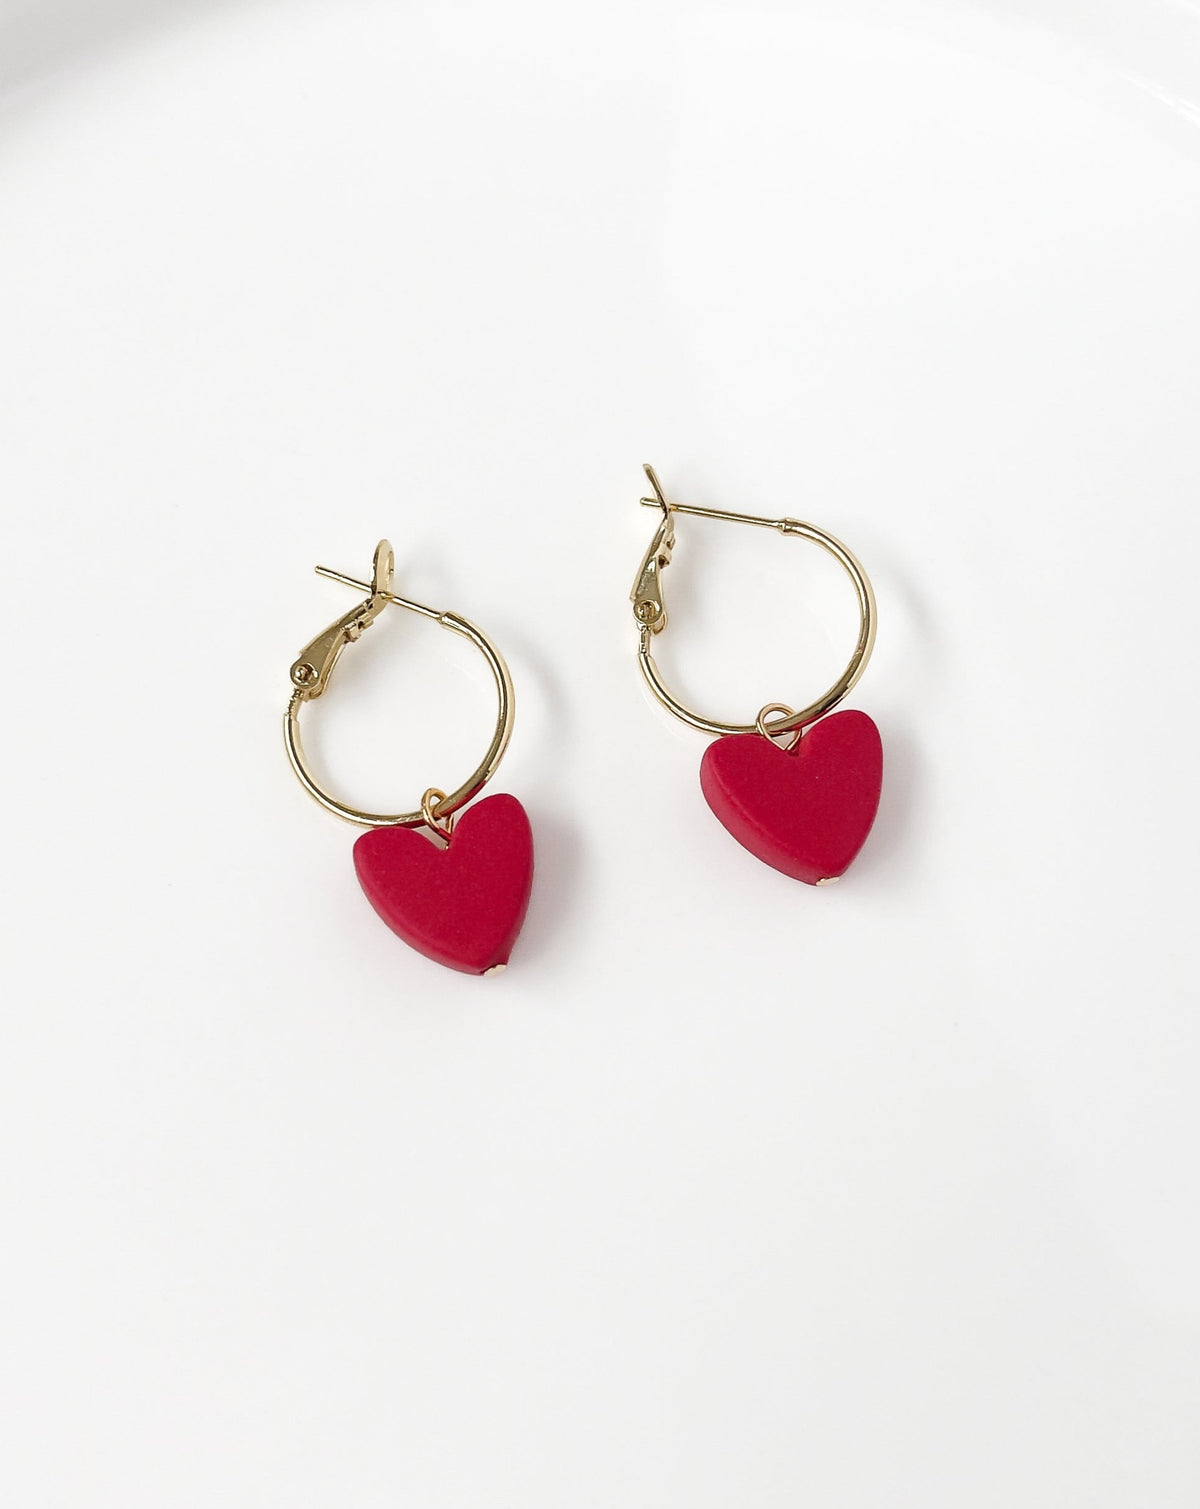 Angled view of Charming Heart earrings with Gold regular Hoops and Red Heart charm.